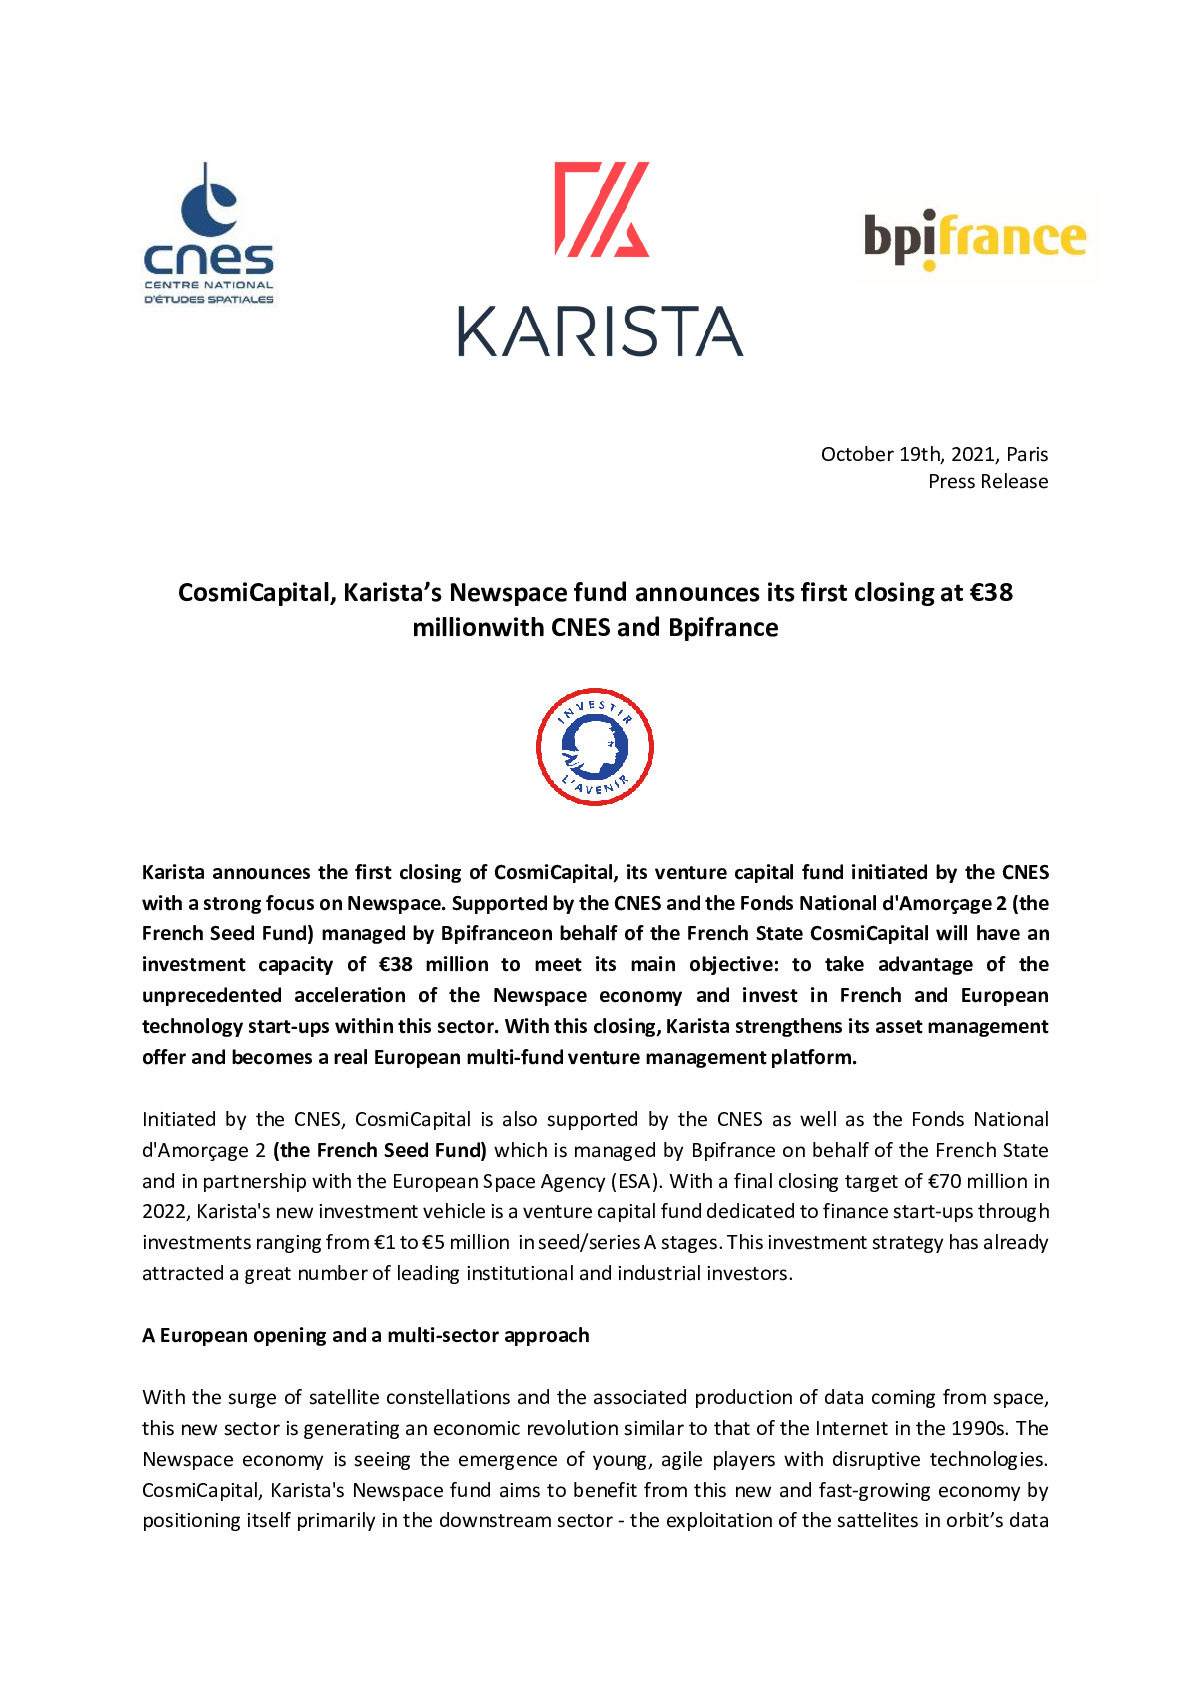 2021 10 19 – PR – CosmiCapital Karistas Newspace fund announces its first closing at 38 million euroswith CNES and Bpifrance-pdf